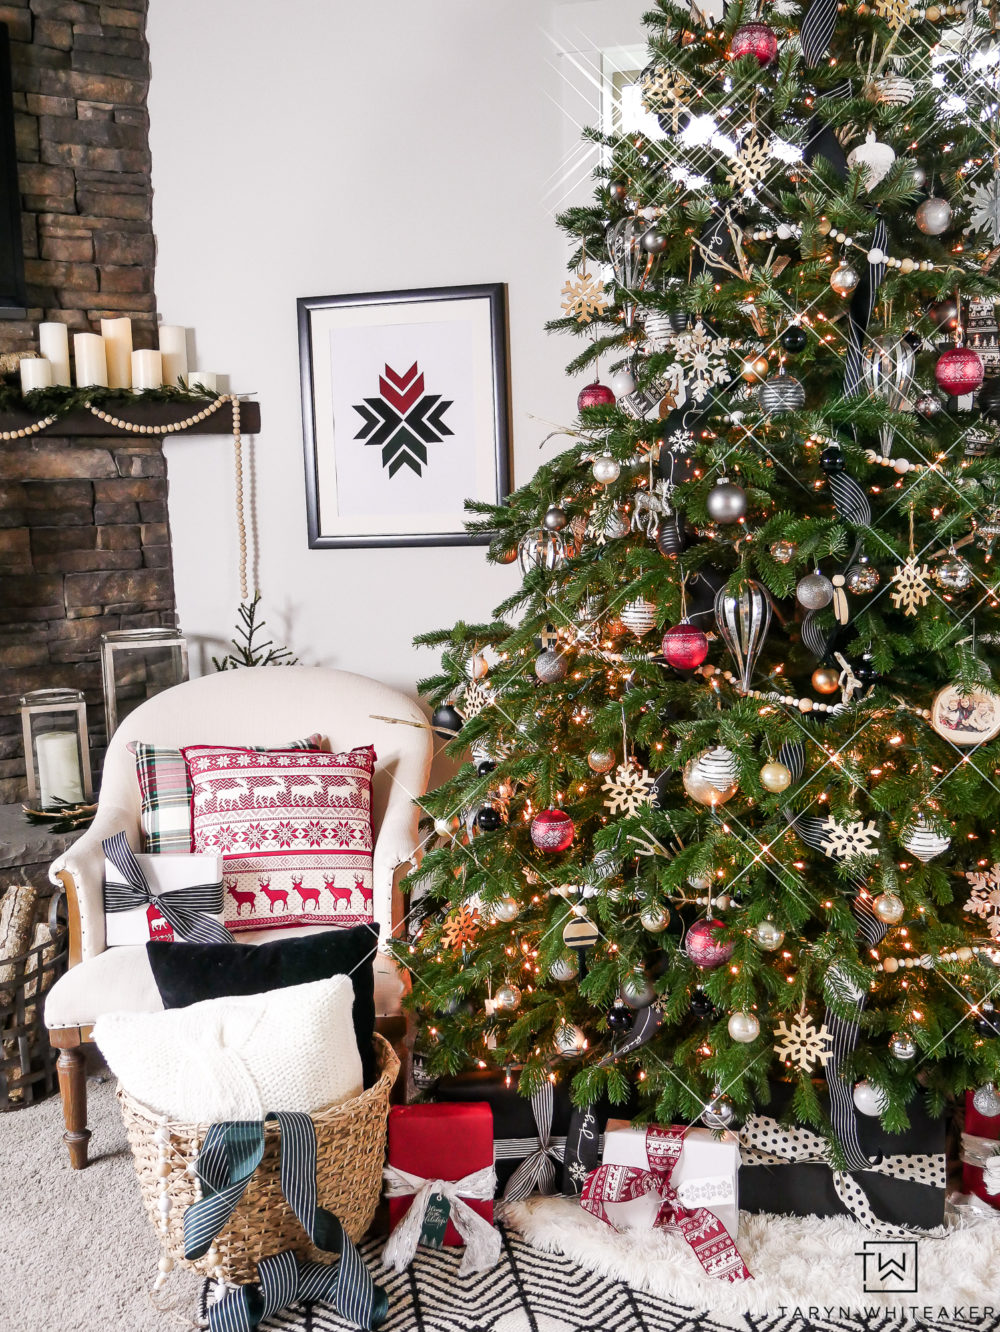 Take a tour of this woodland chic Christmas Tree that used red, black and metal ornaments mixed with natural wood textures.